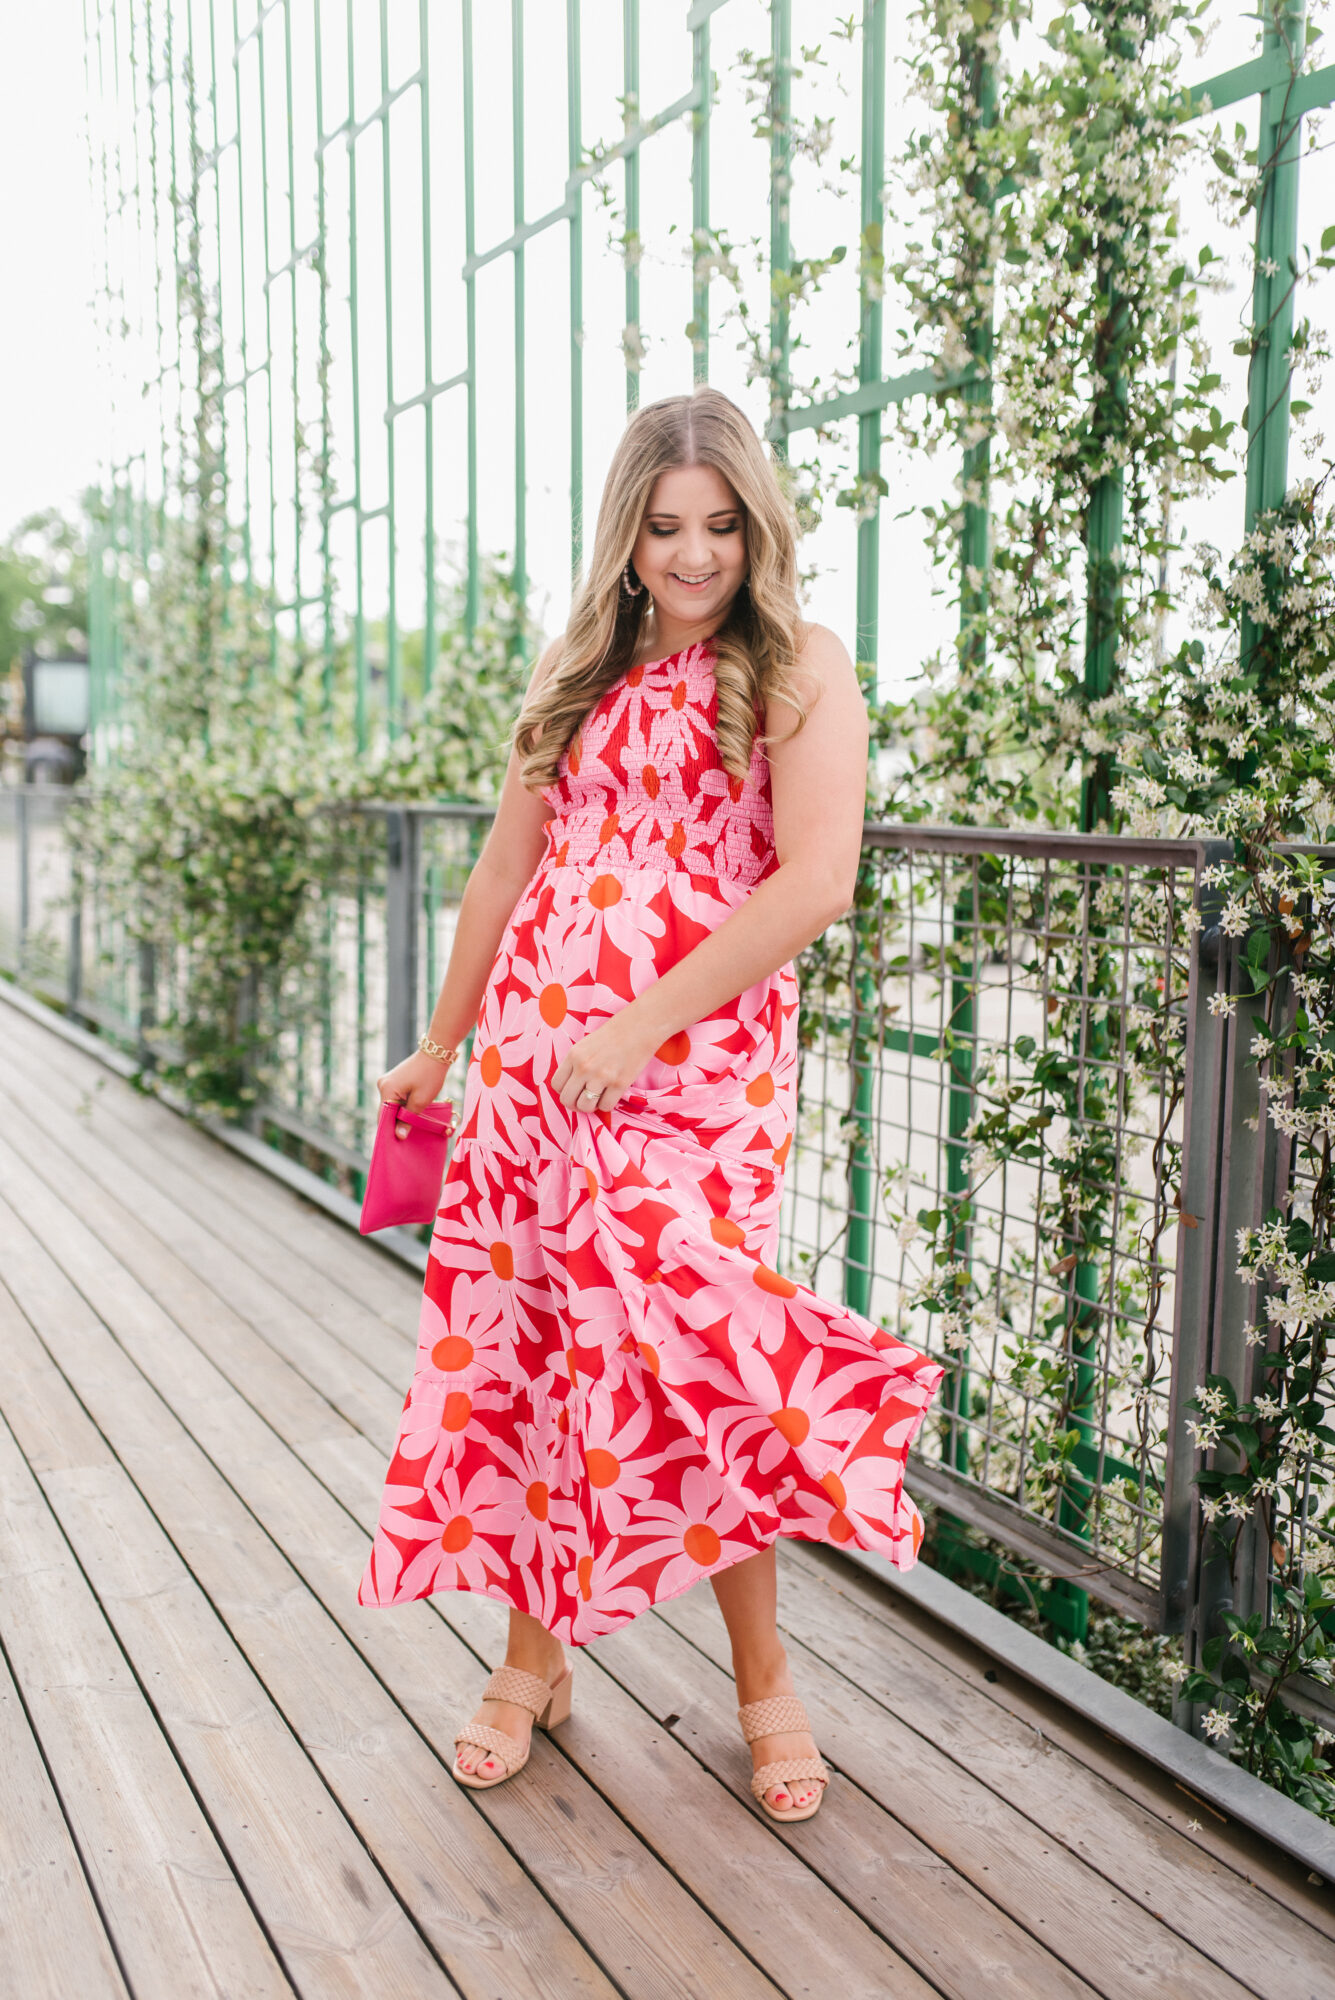 Wedding Guest Dresses from Amazon for Under $50 - Thrifty Pineapple